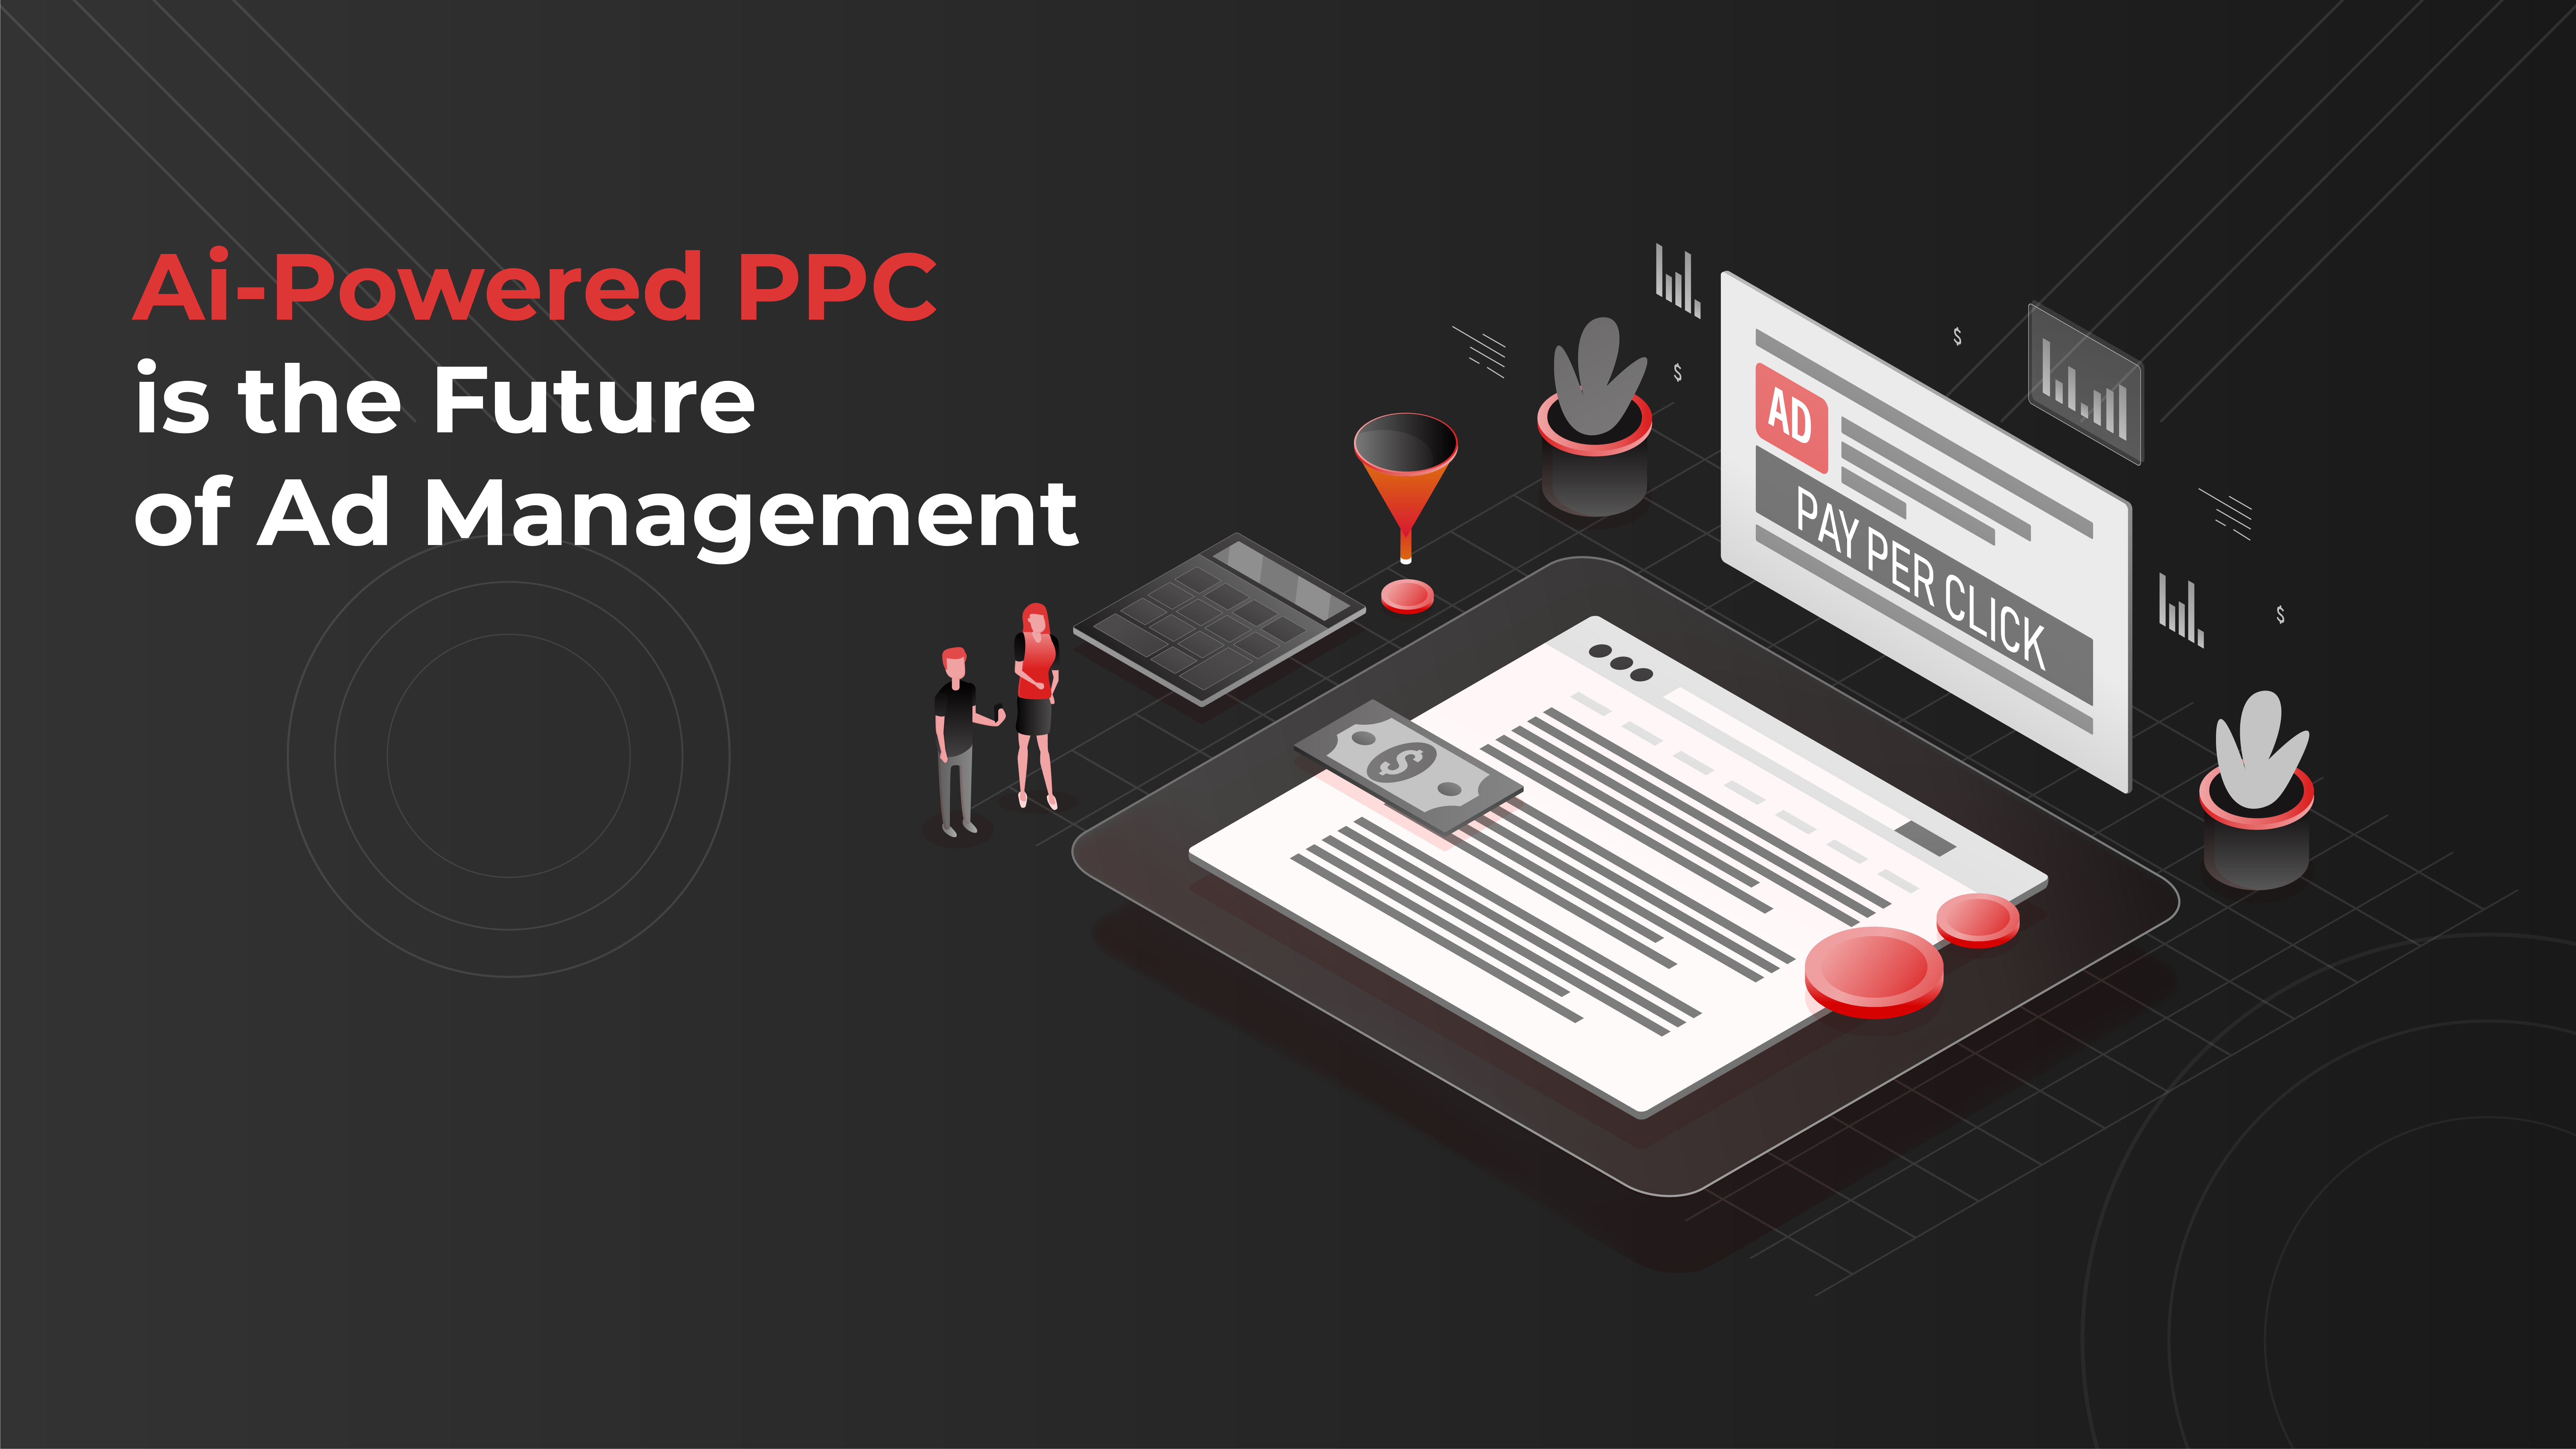 AI-Powered PPC is the Future of Ad Management